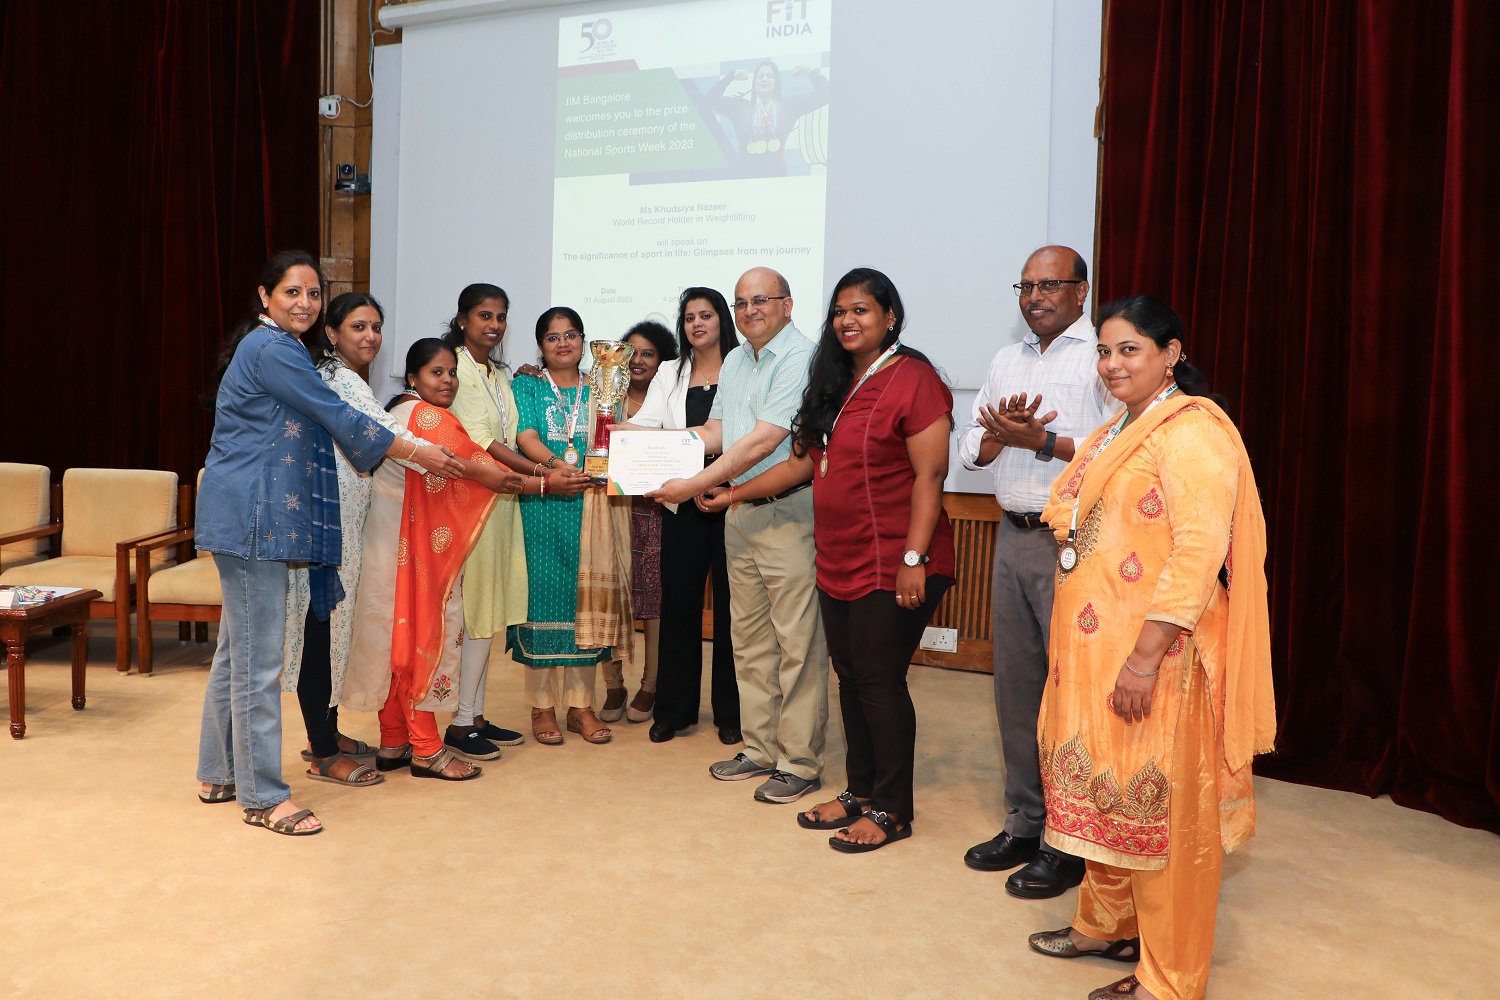 Weightlifting champion Khudsiya Nazeer delivered a talk on, ‘The Significance of Sport in Life: Glimpses from My Journey’, during the prize distribution ceremony marking the finale of the National Sports Week 2023, held by IIM Bangalore on 31st August 2023.